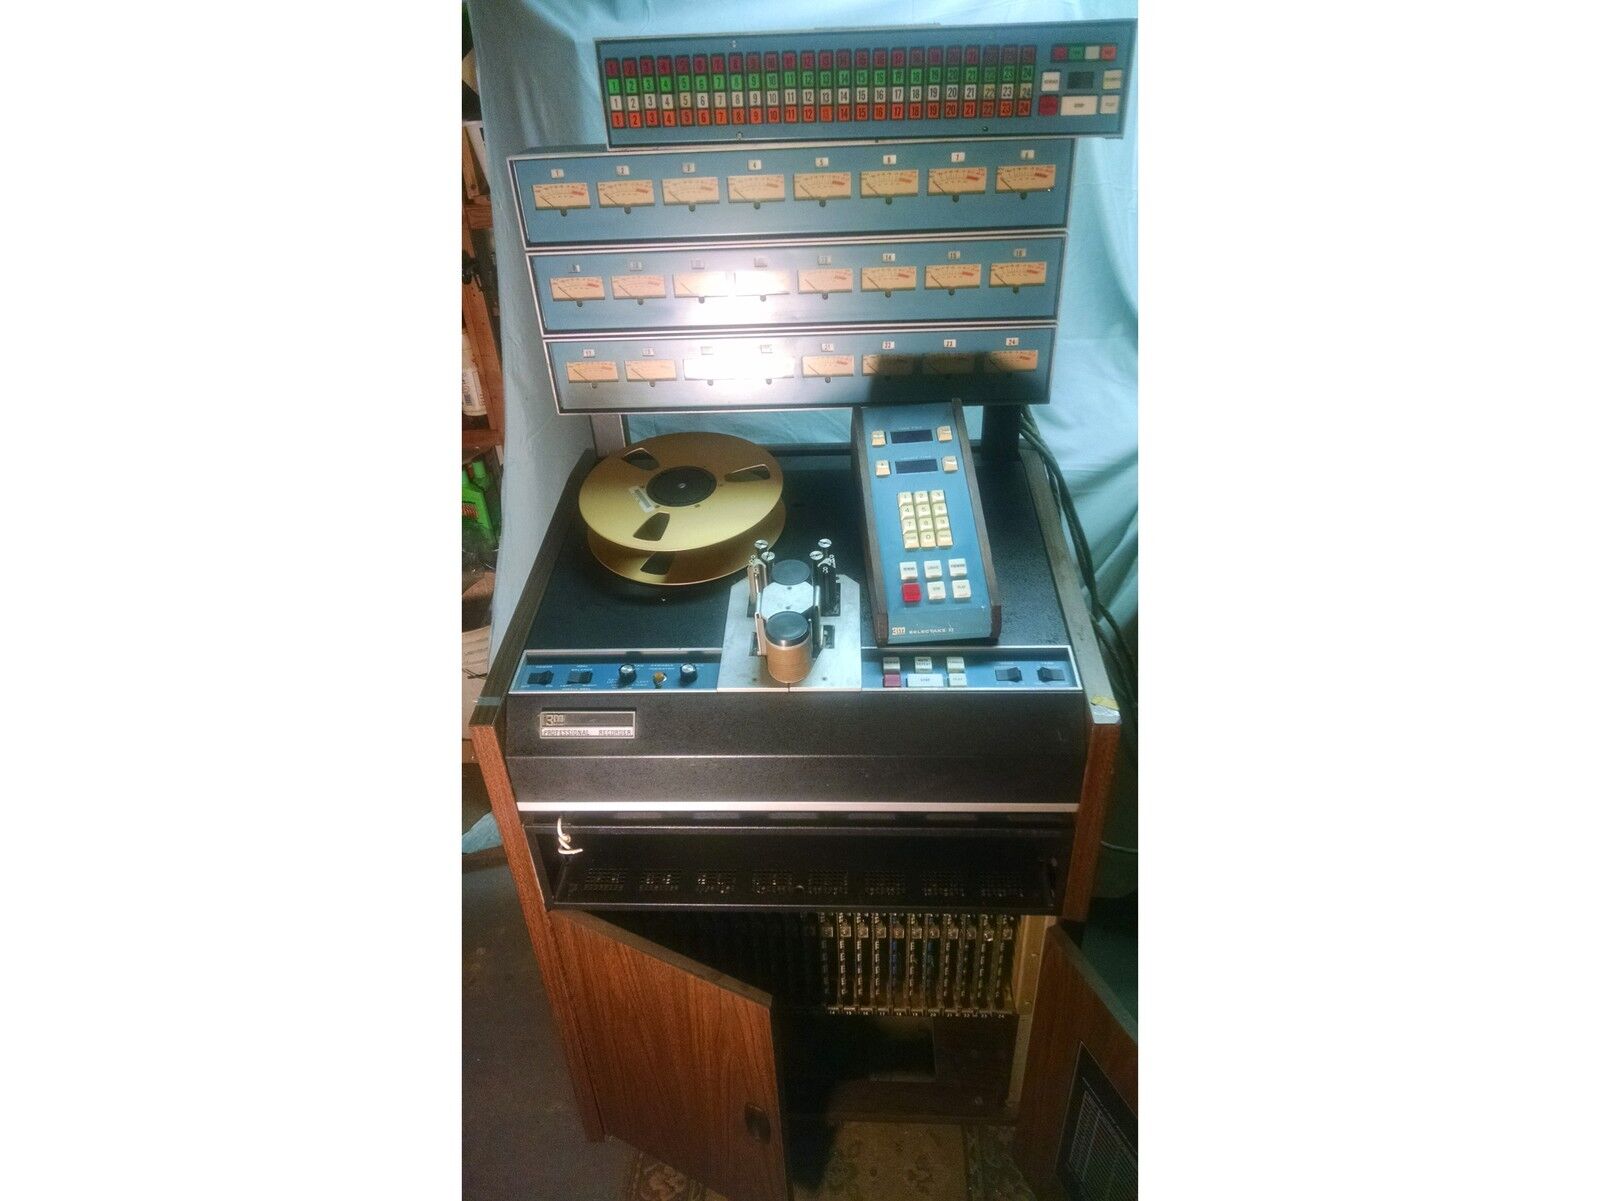 3M Mincom M79 24 TRACK 2 INCH TAPE MACHINE RECORDER RAN WELL WHEN PARKED AS IS